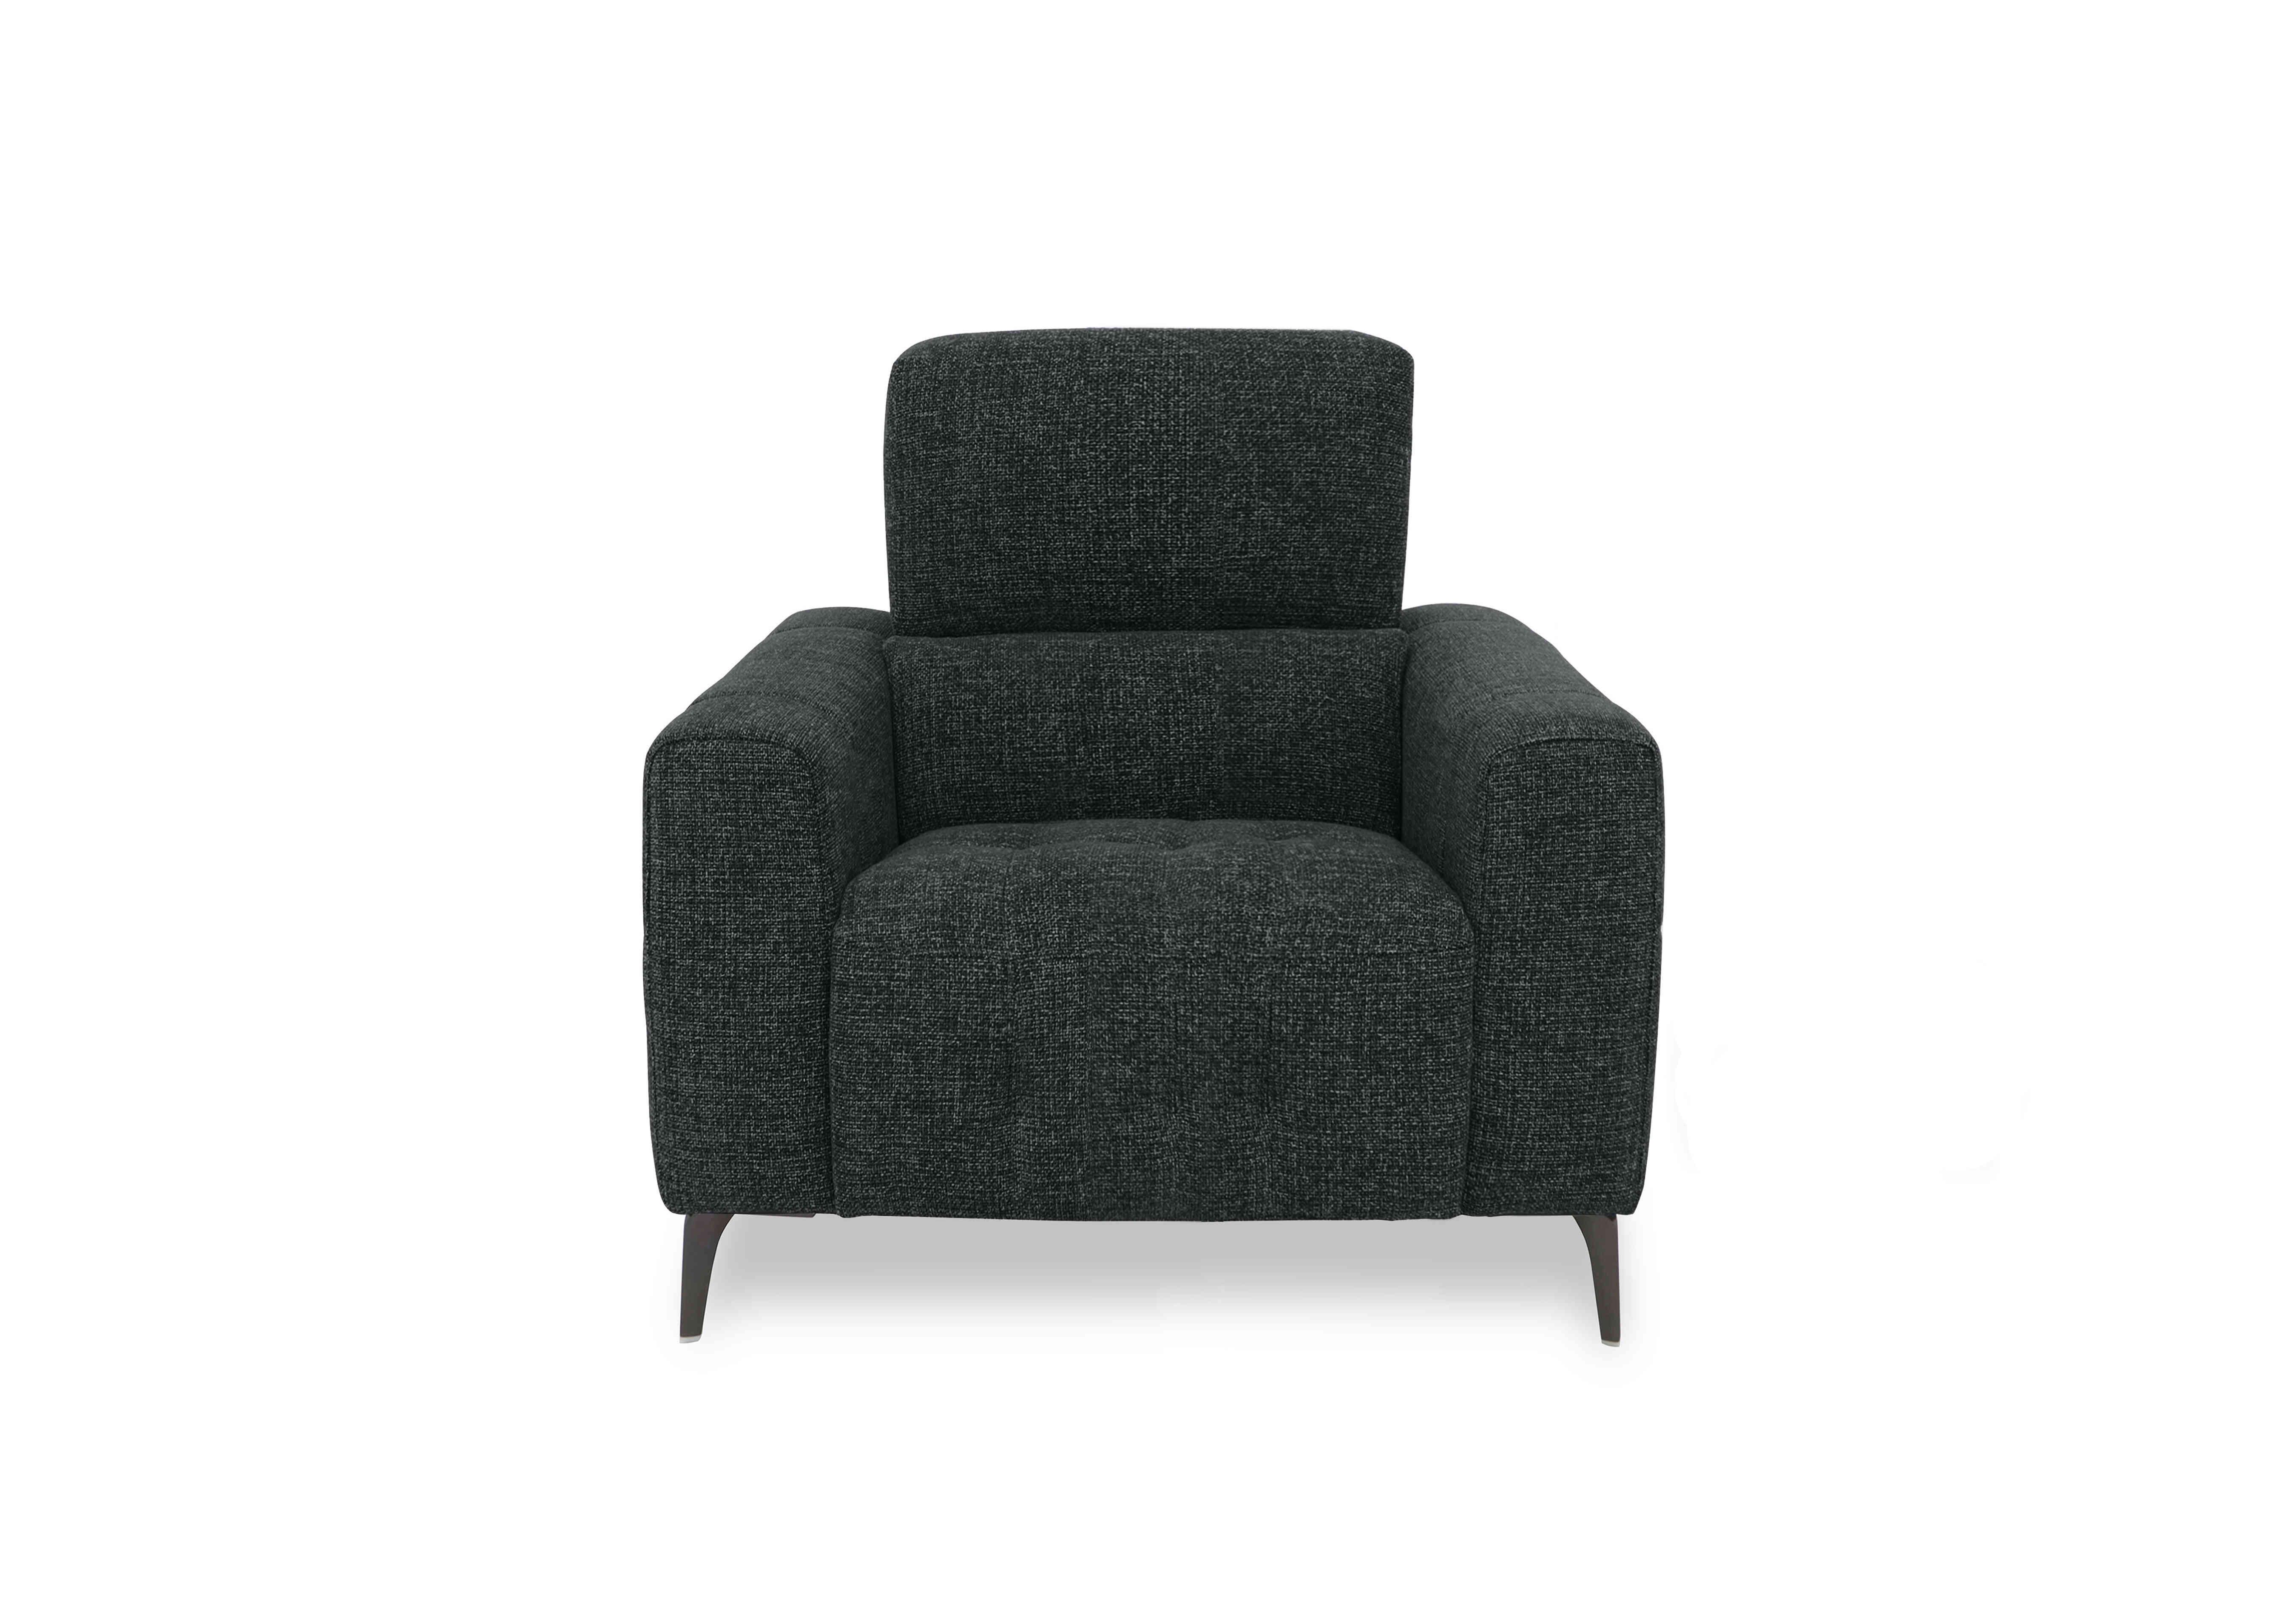 New York Fabric Chair in Fab-Cac-R463 Black Mica on Furniture Village